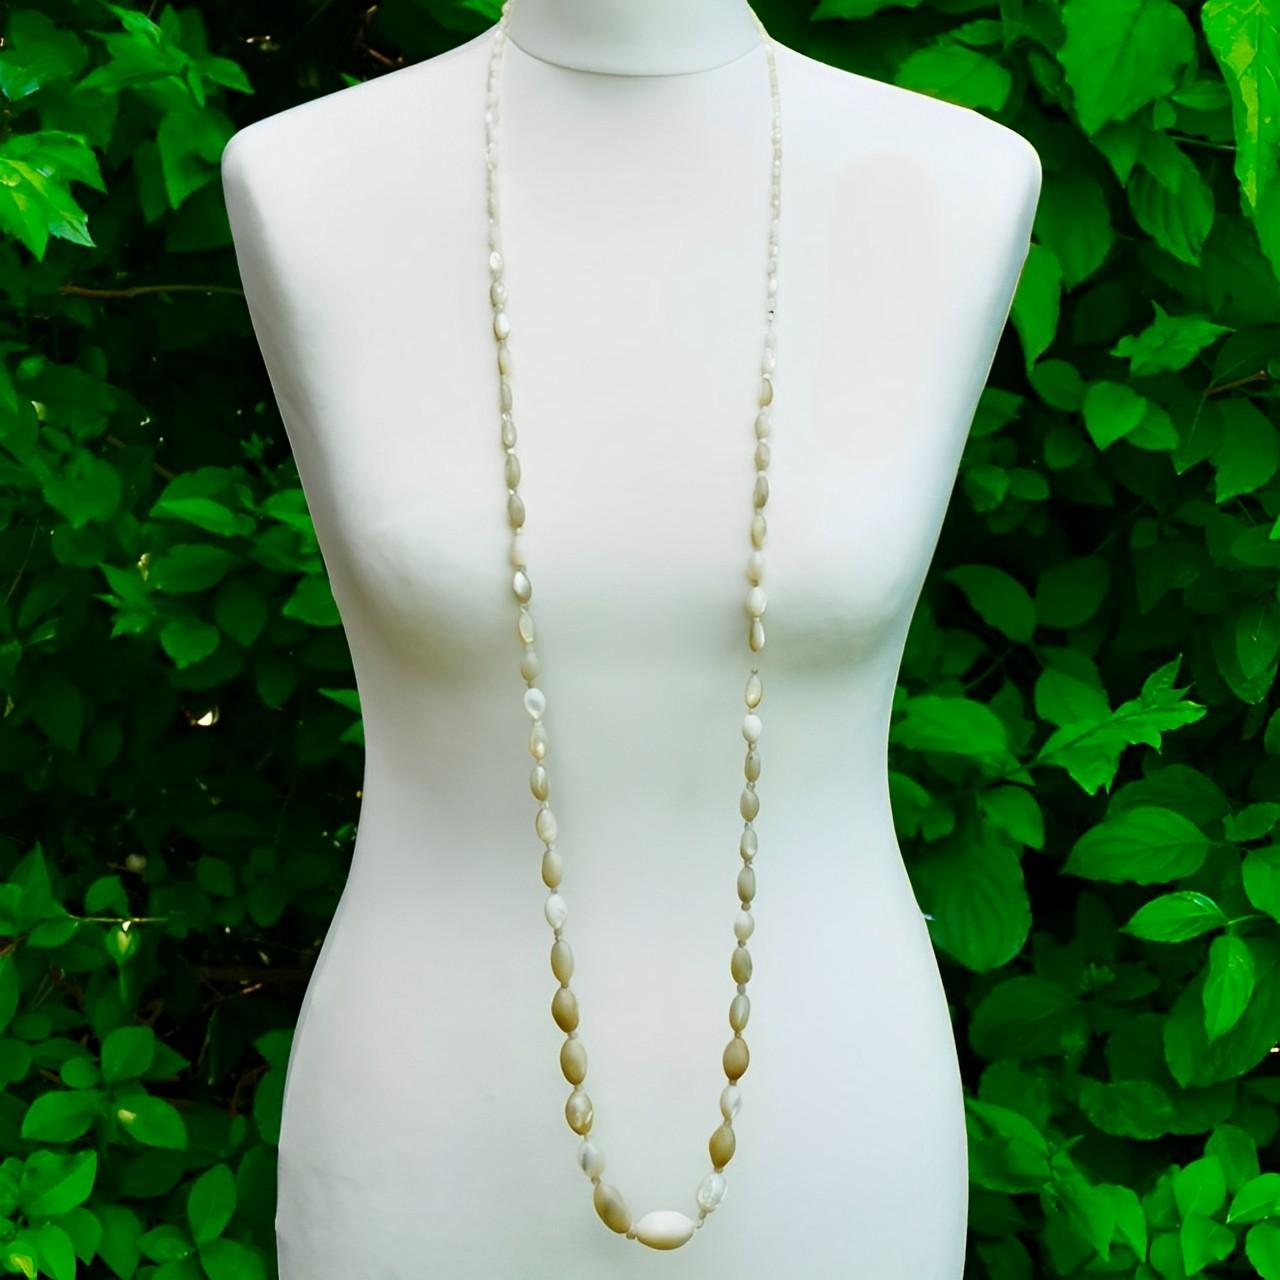 

Lovely long mother of pearl necklace with oval shaped beads, small mother of pearl spacers., and a rhinestone set clasp. Measuring necklace length 130 cm / 51 inches. 

The necklace has graduated sized beads. It has been re-designed and restrung